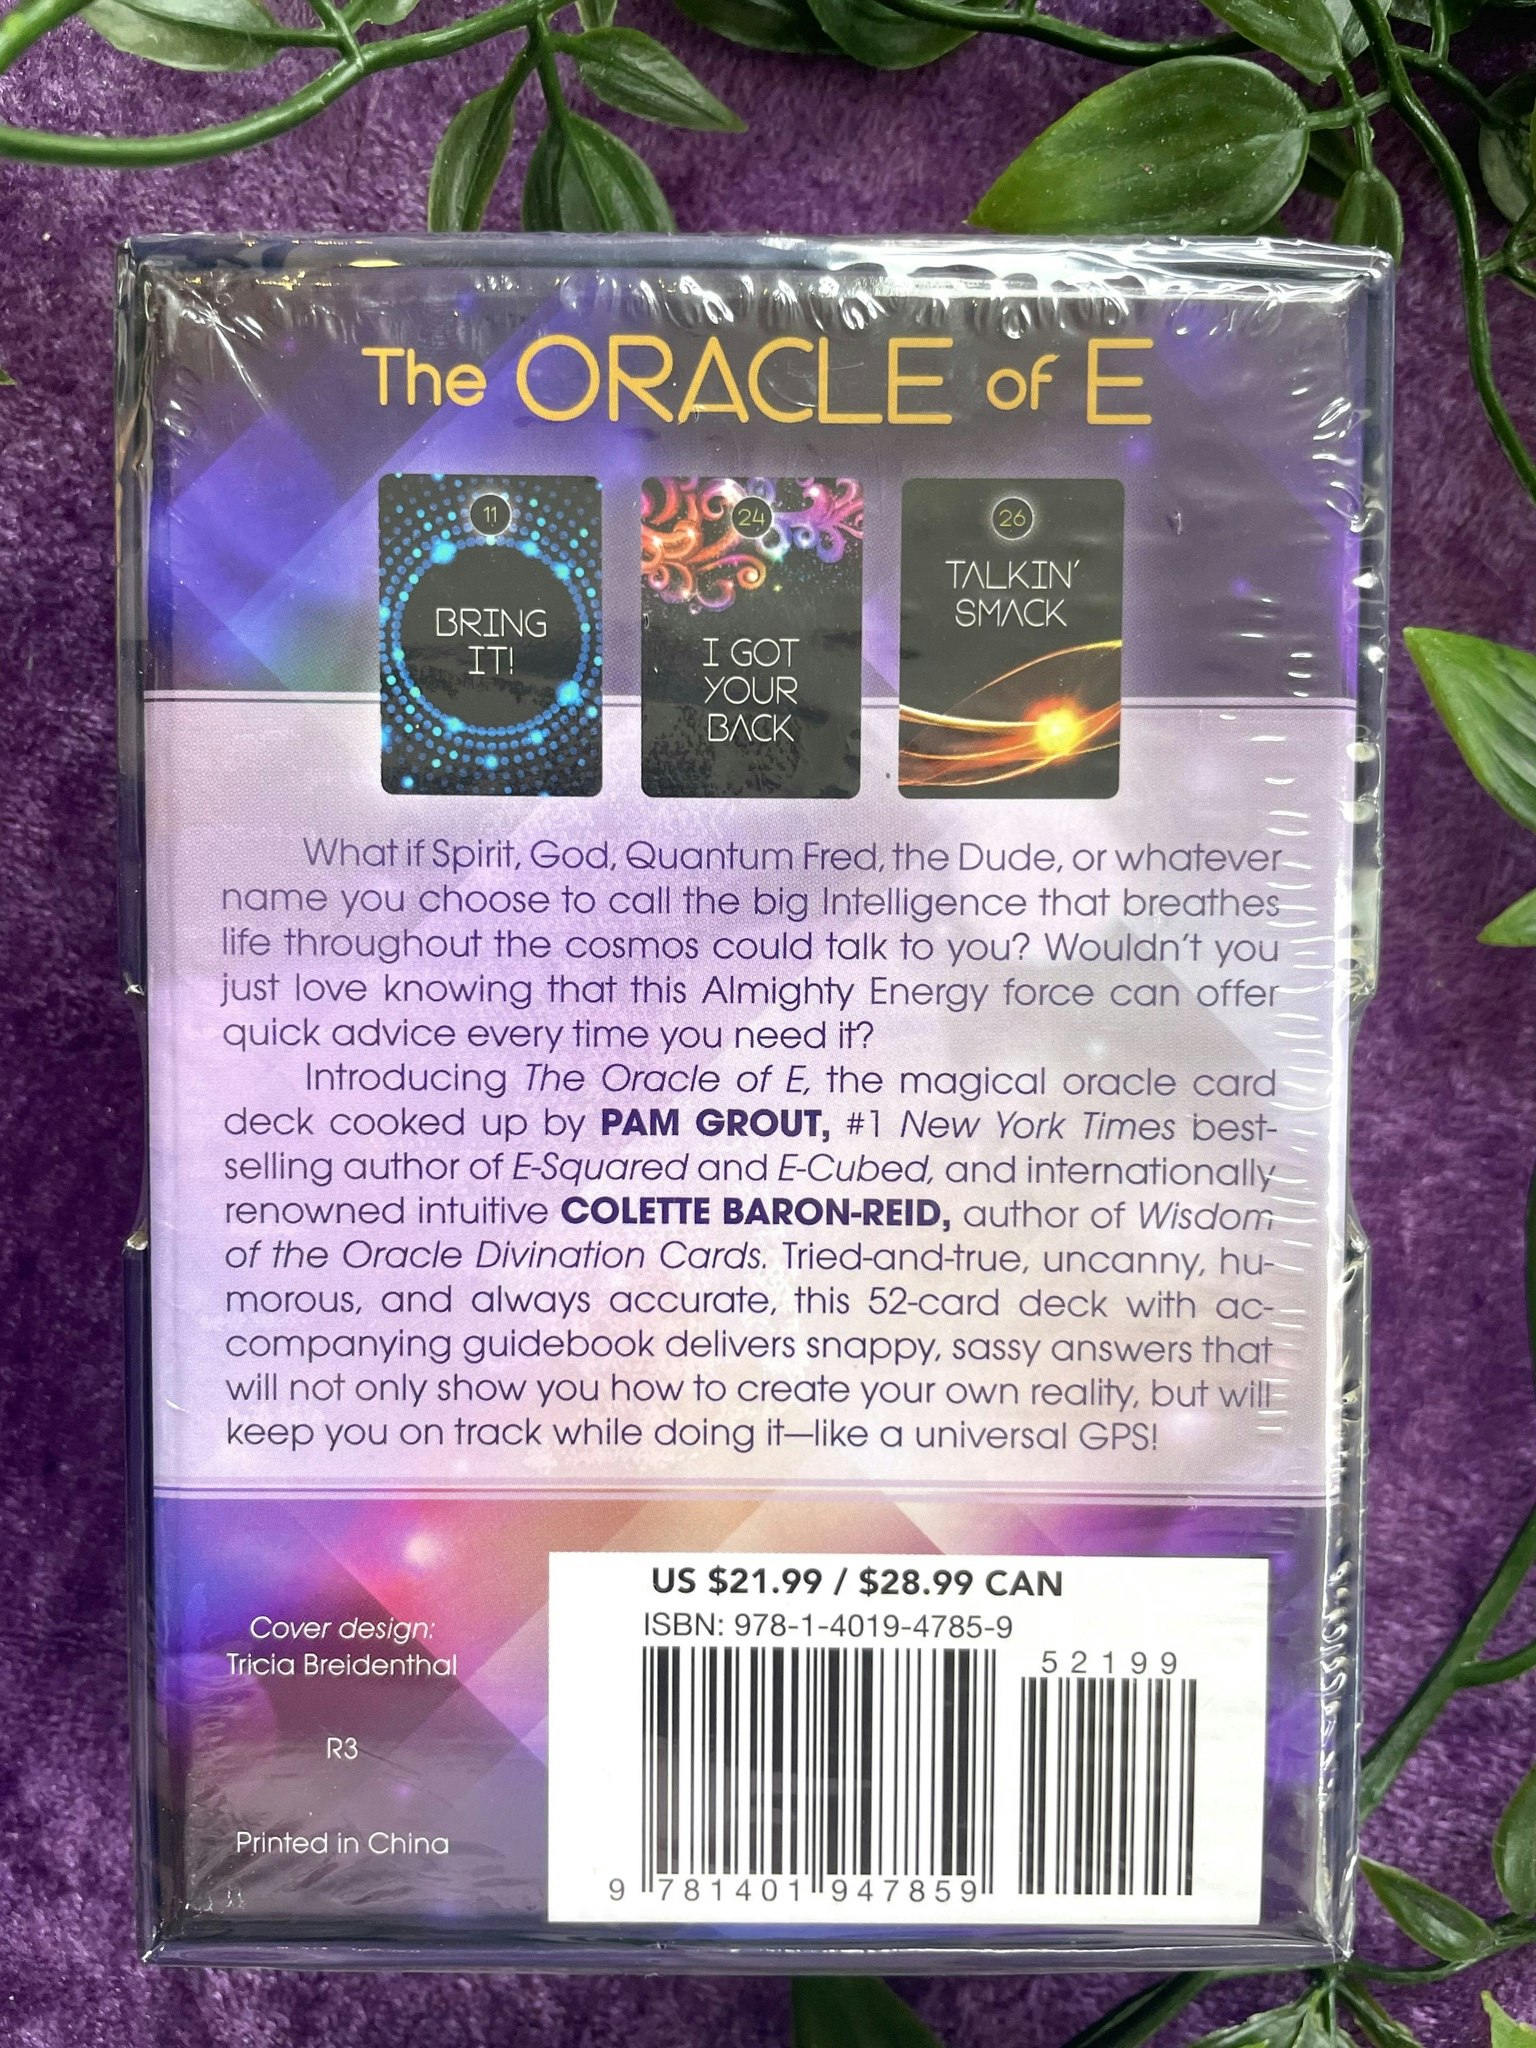 The Oracle of E